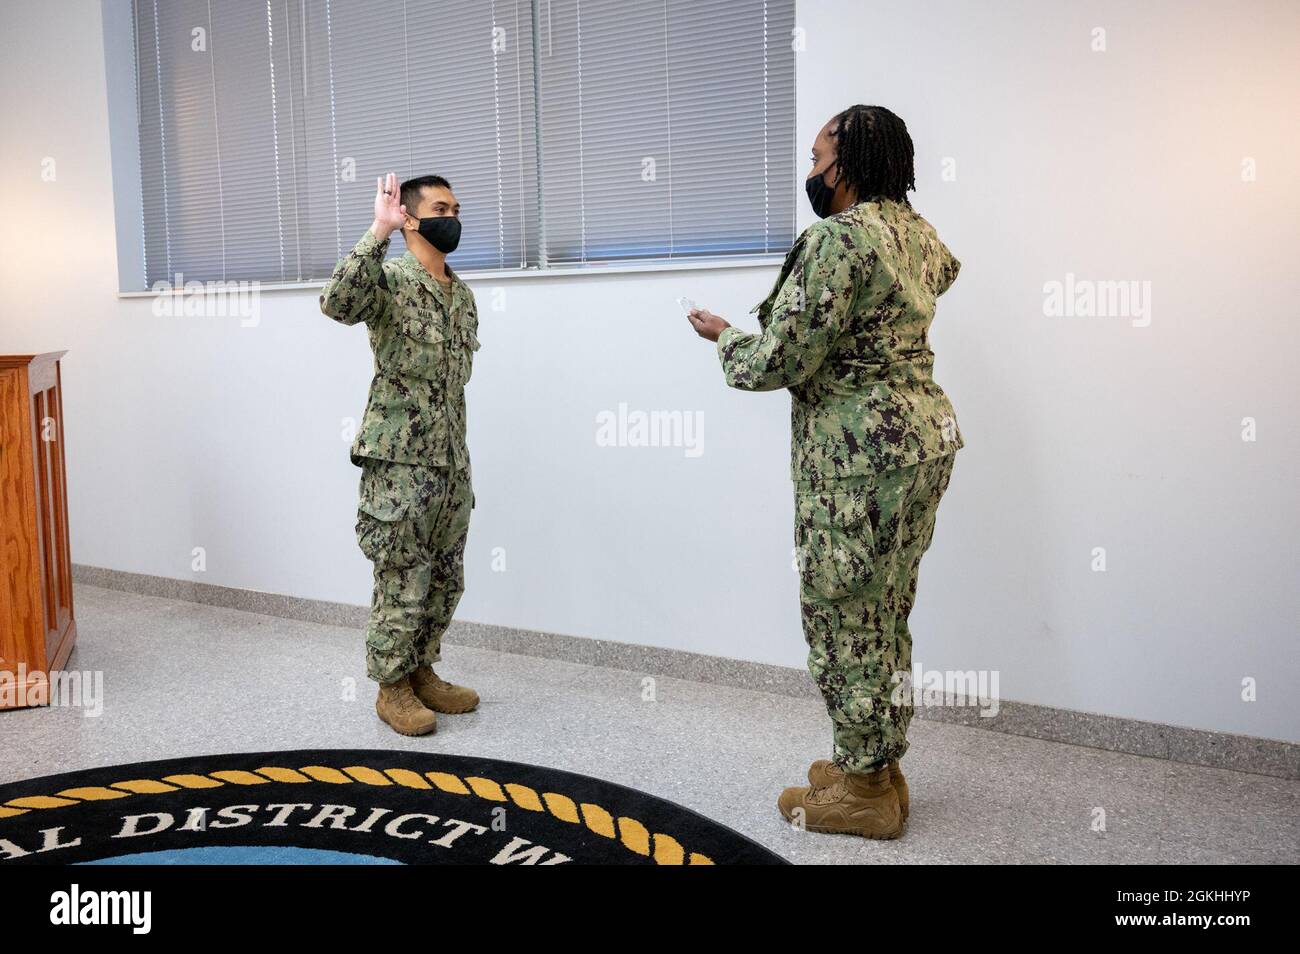 WASHINGTON, DC (April 23, 2021) – Religious Program Specialist 2nd Class Arvin Malin, left, recites the oath of enlistment during a ceremony onboard Washington Navy Yard. Stock Photo